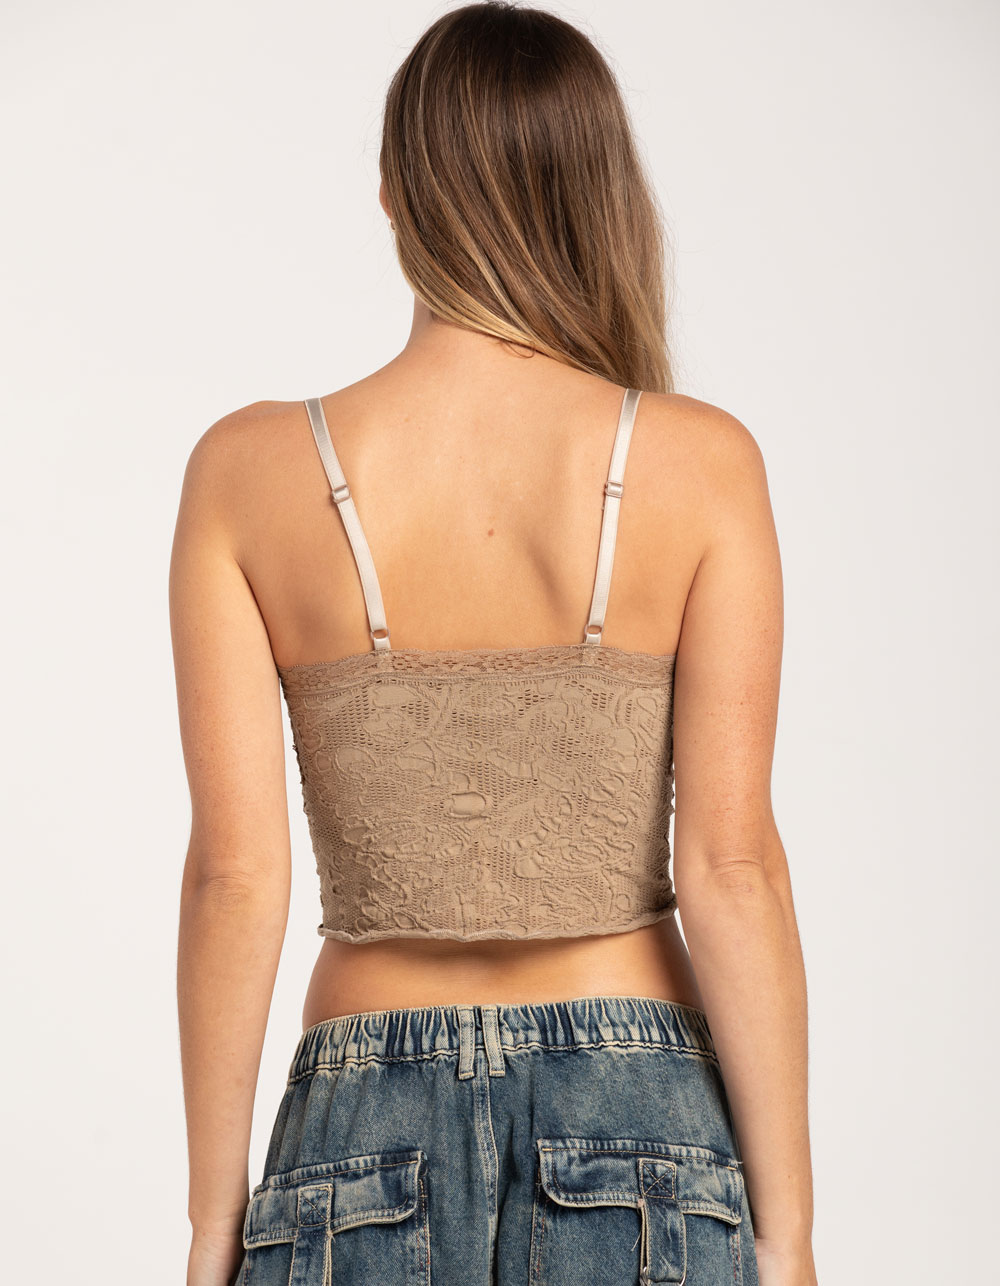 BDG Urban Outfitters Seamless Contrast Cross Womens Lace Cami - STONE